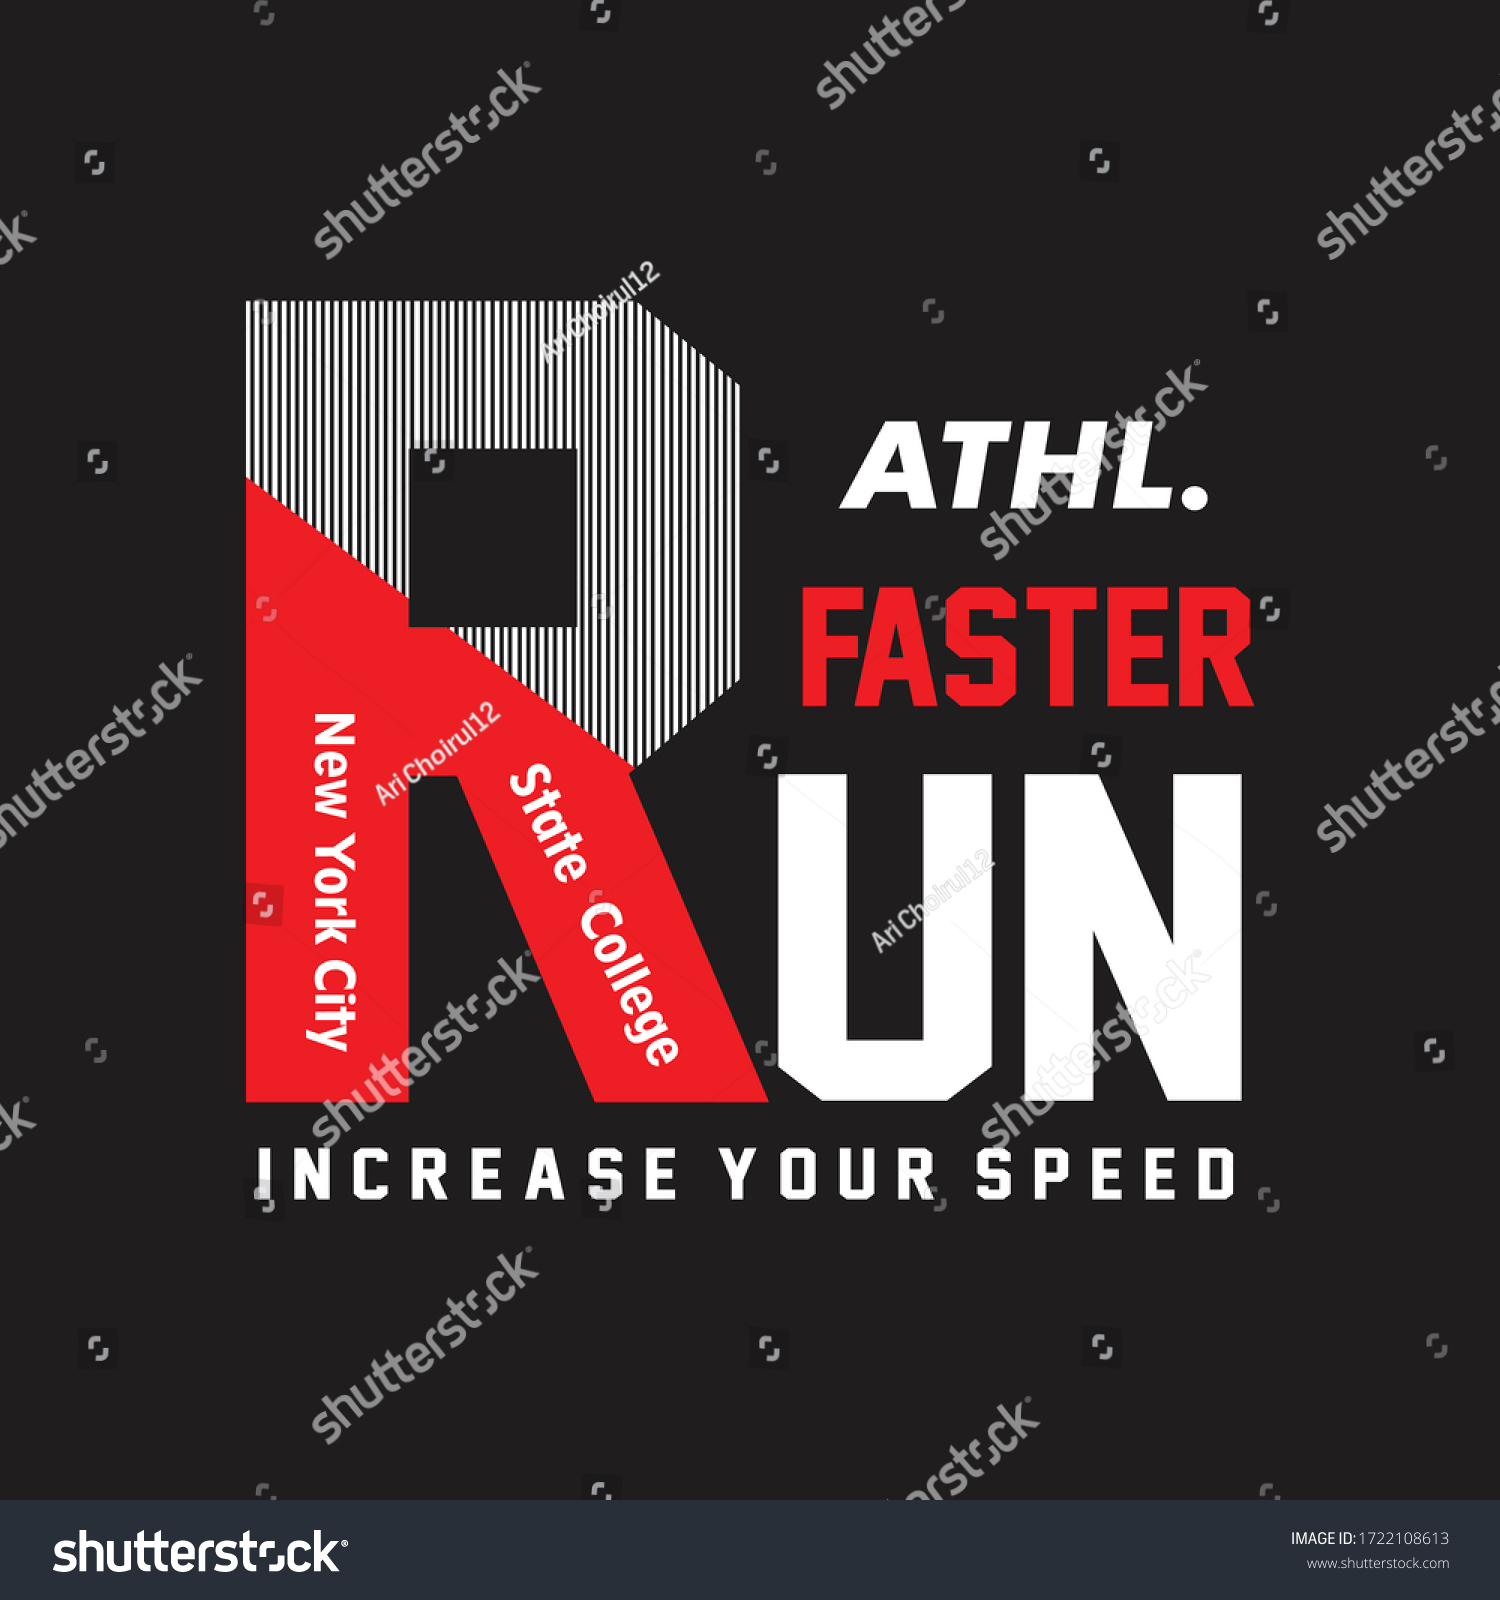 Run Faster Typography Vector Illustration Stock Vector (Royalty Free ...